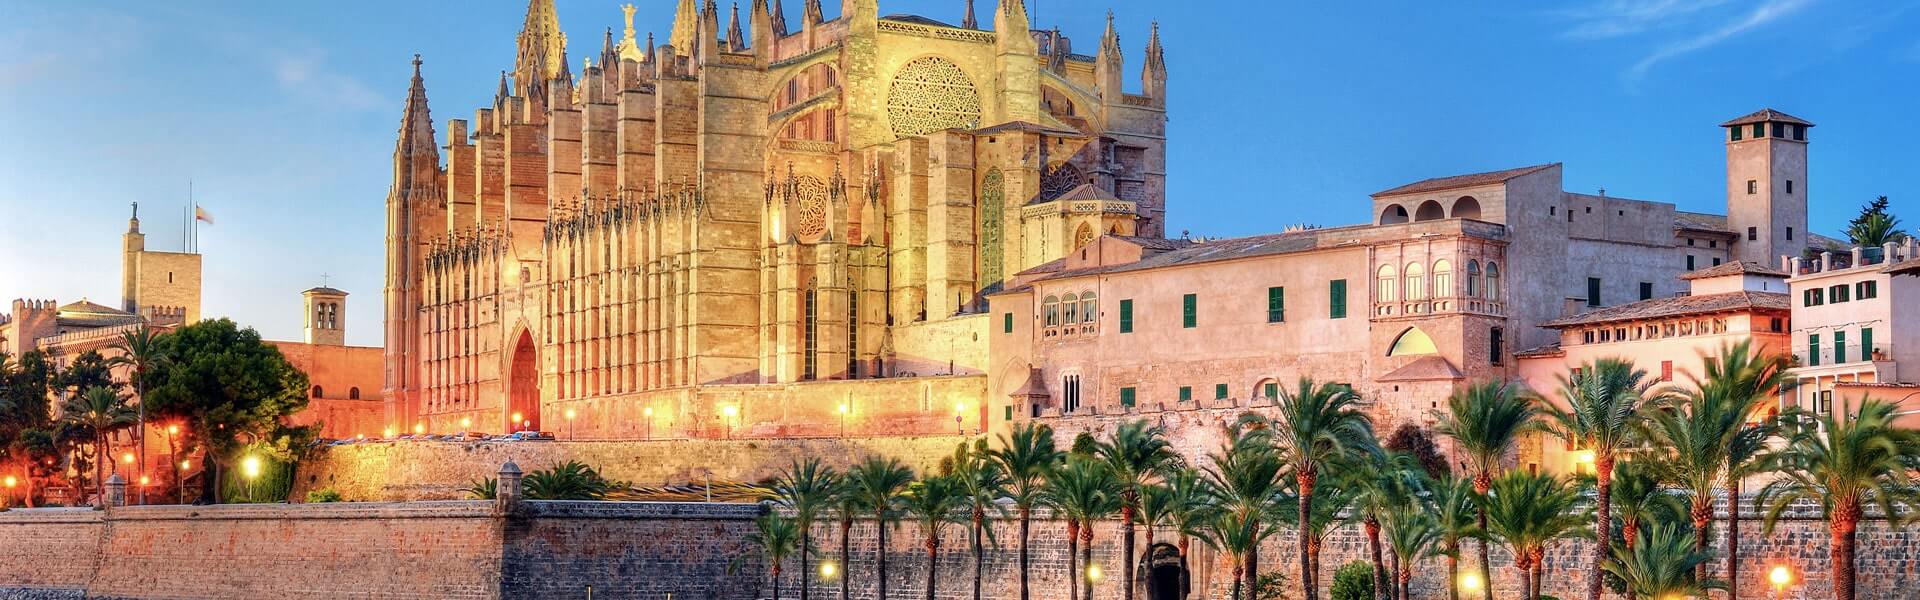 The Palma de Mallorca Cathedral is a real eye-catcher